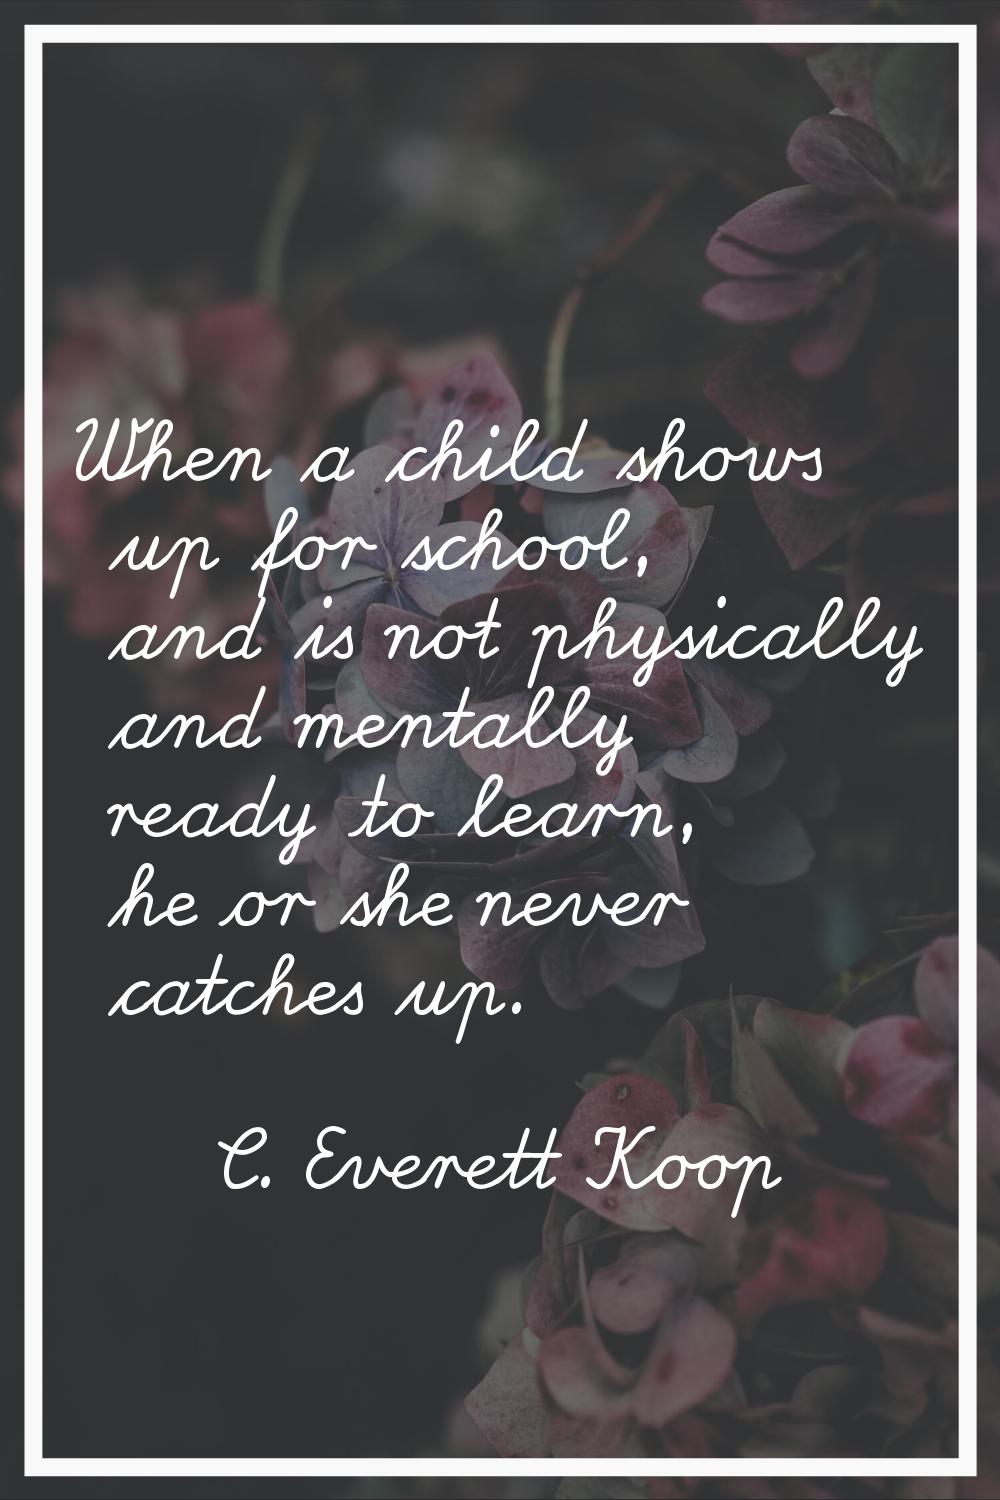 When a child shows up for school, and is not physically and mentally ready to learn, he or she neve